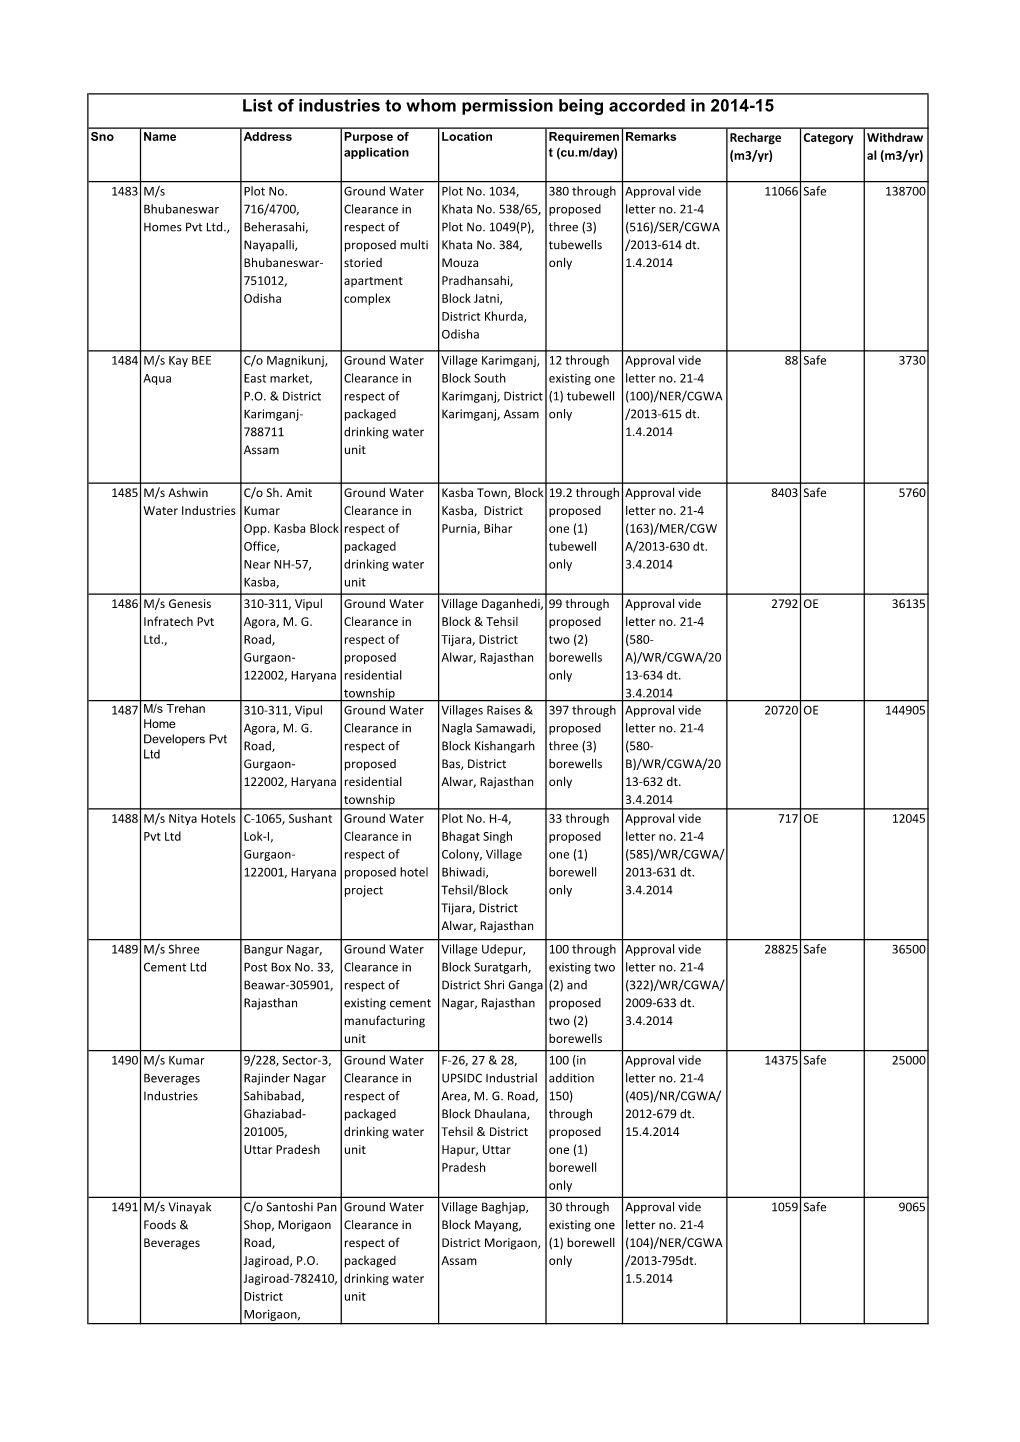 List of Industries to Whom Permission Being Accorded in 2014-15